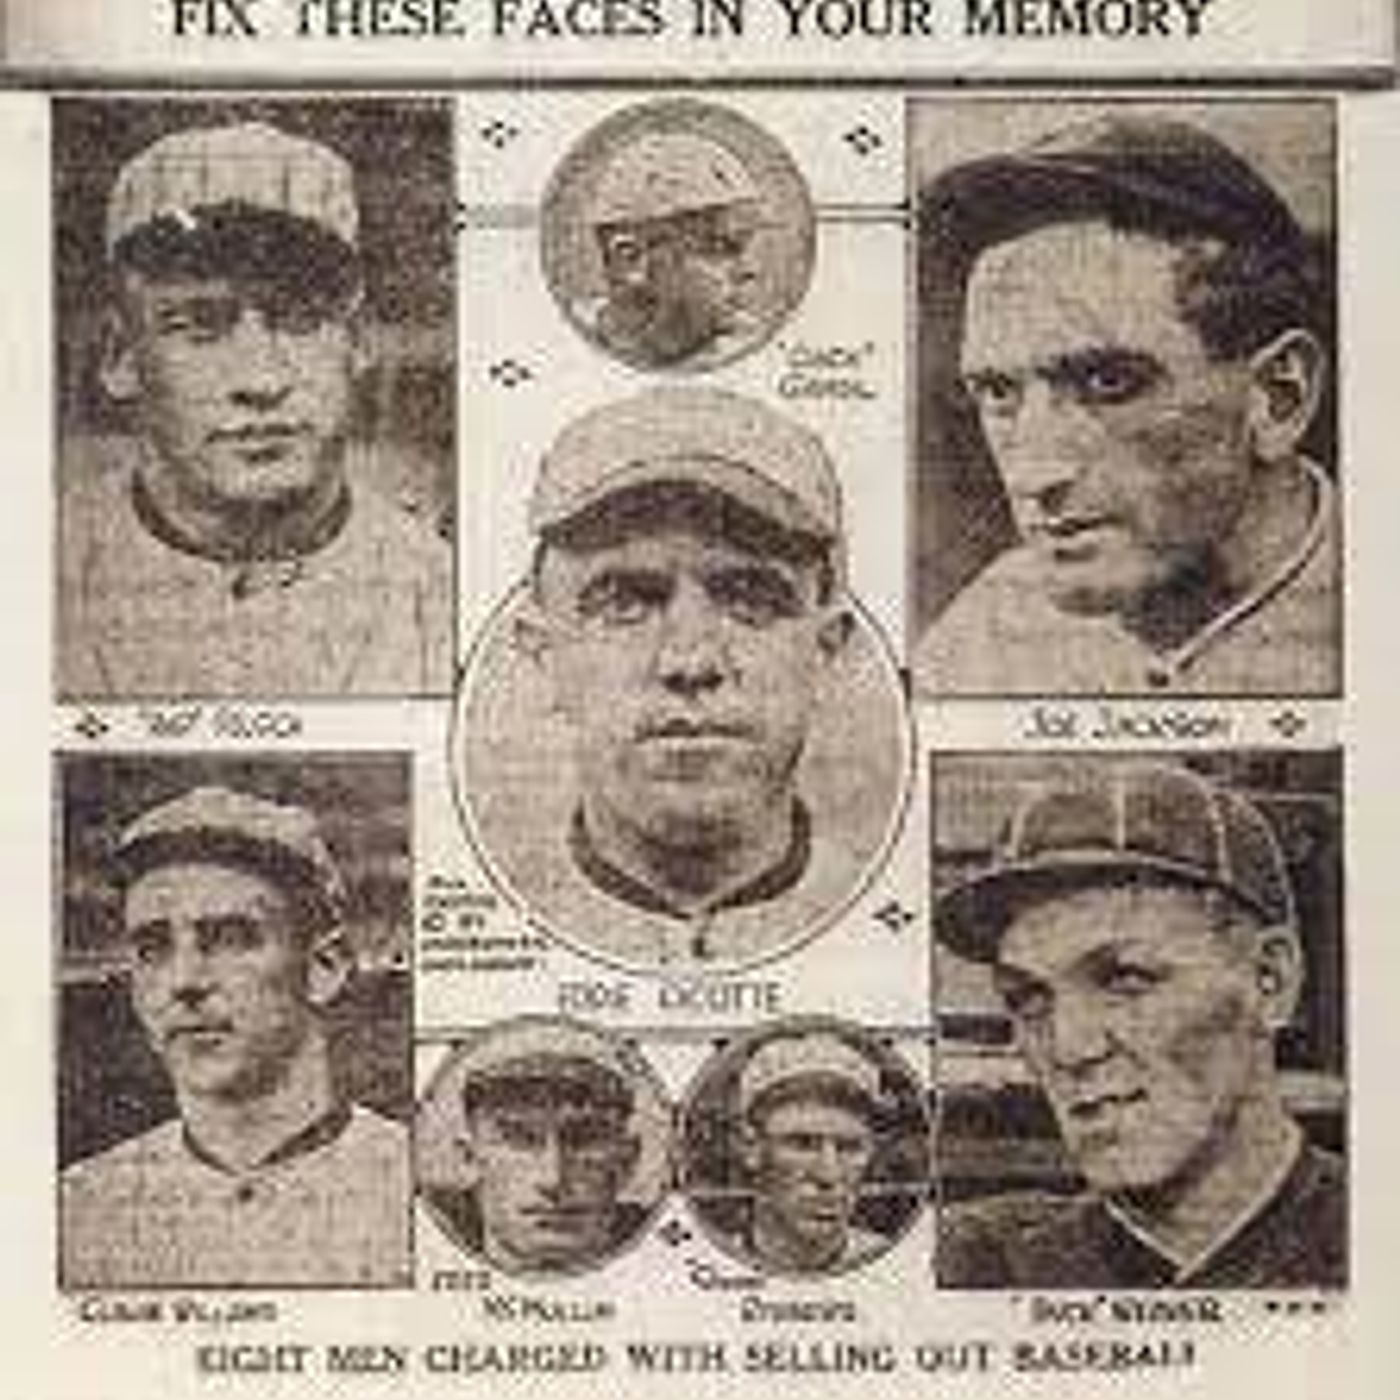 Part 1 of 2 - The 1919 Chicago Black Sox Scandal